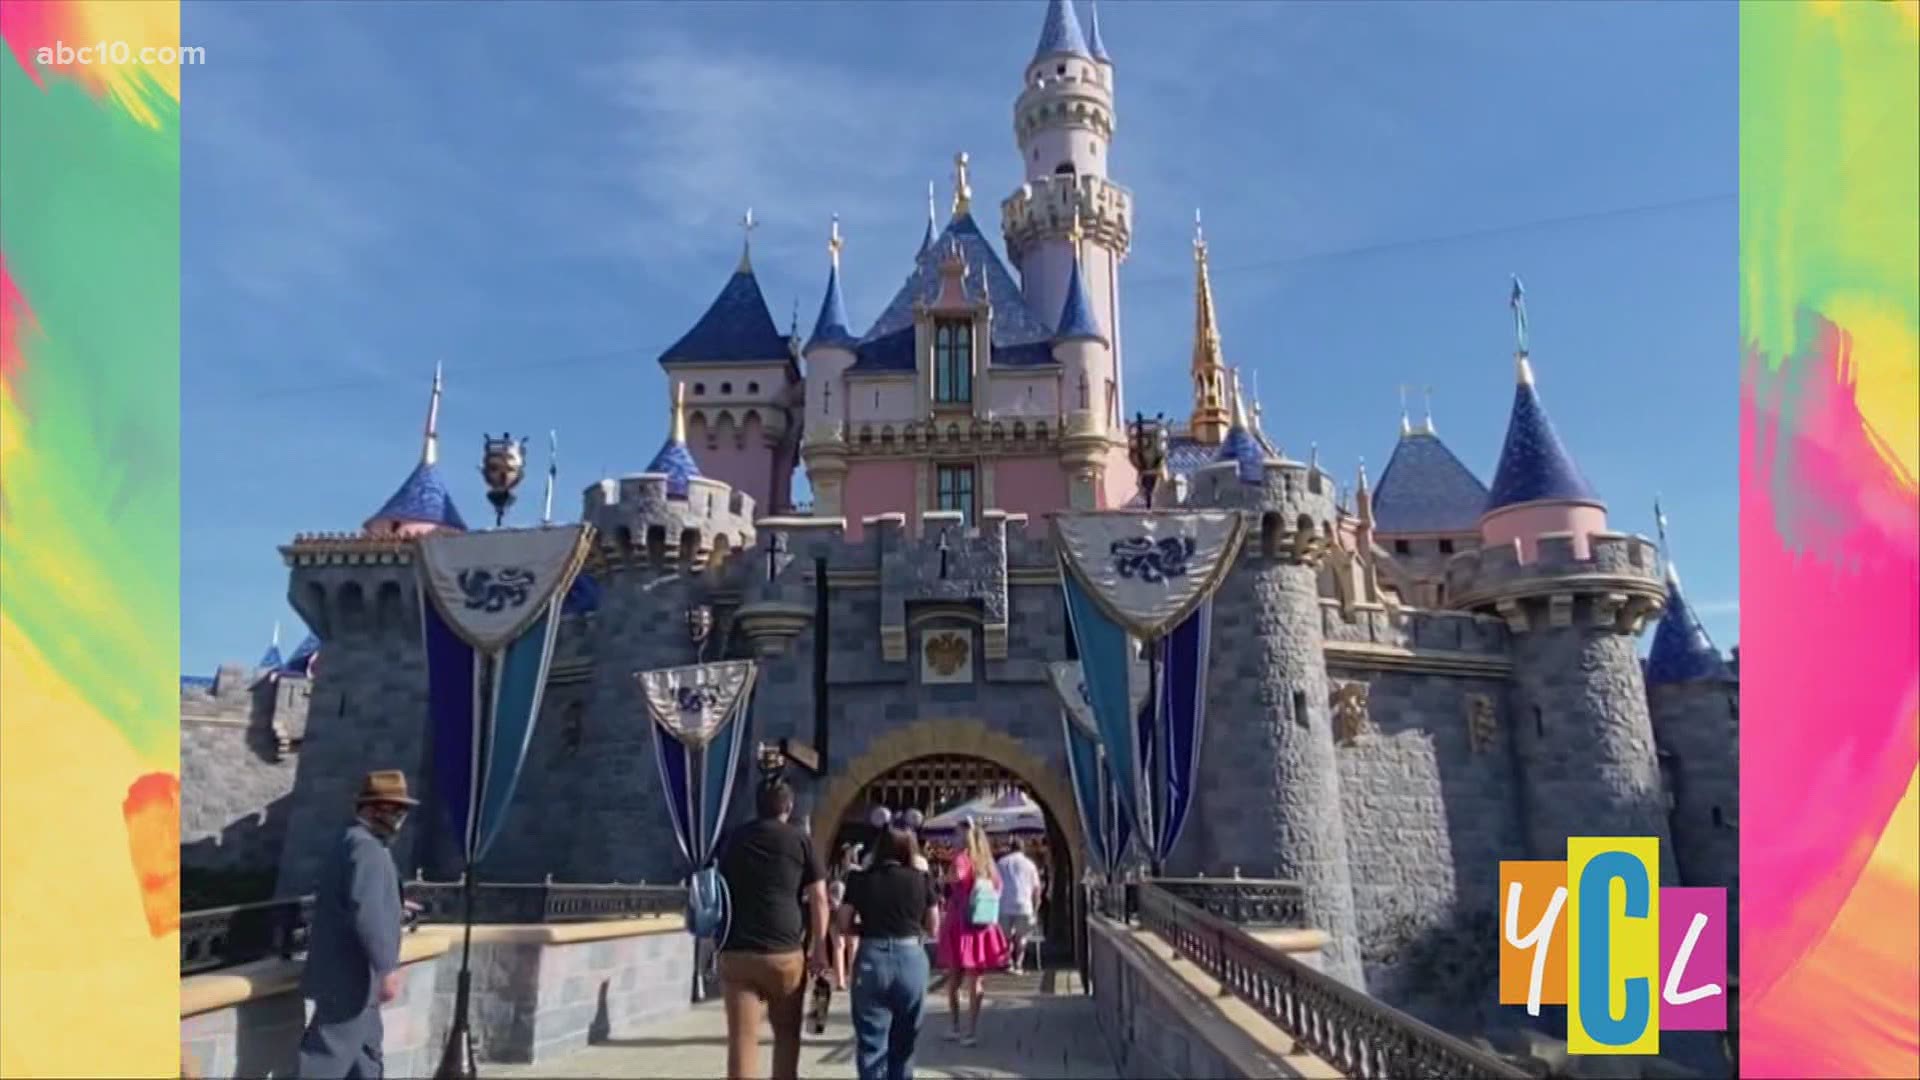 We sprinkle Disney magic into the show because the happiest place on earth has re-opened!! "Trips with Tykes" explains how to do Disneyland different in 2021!